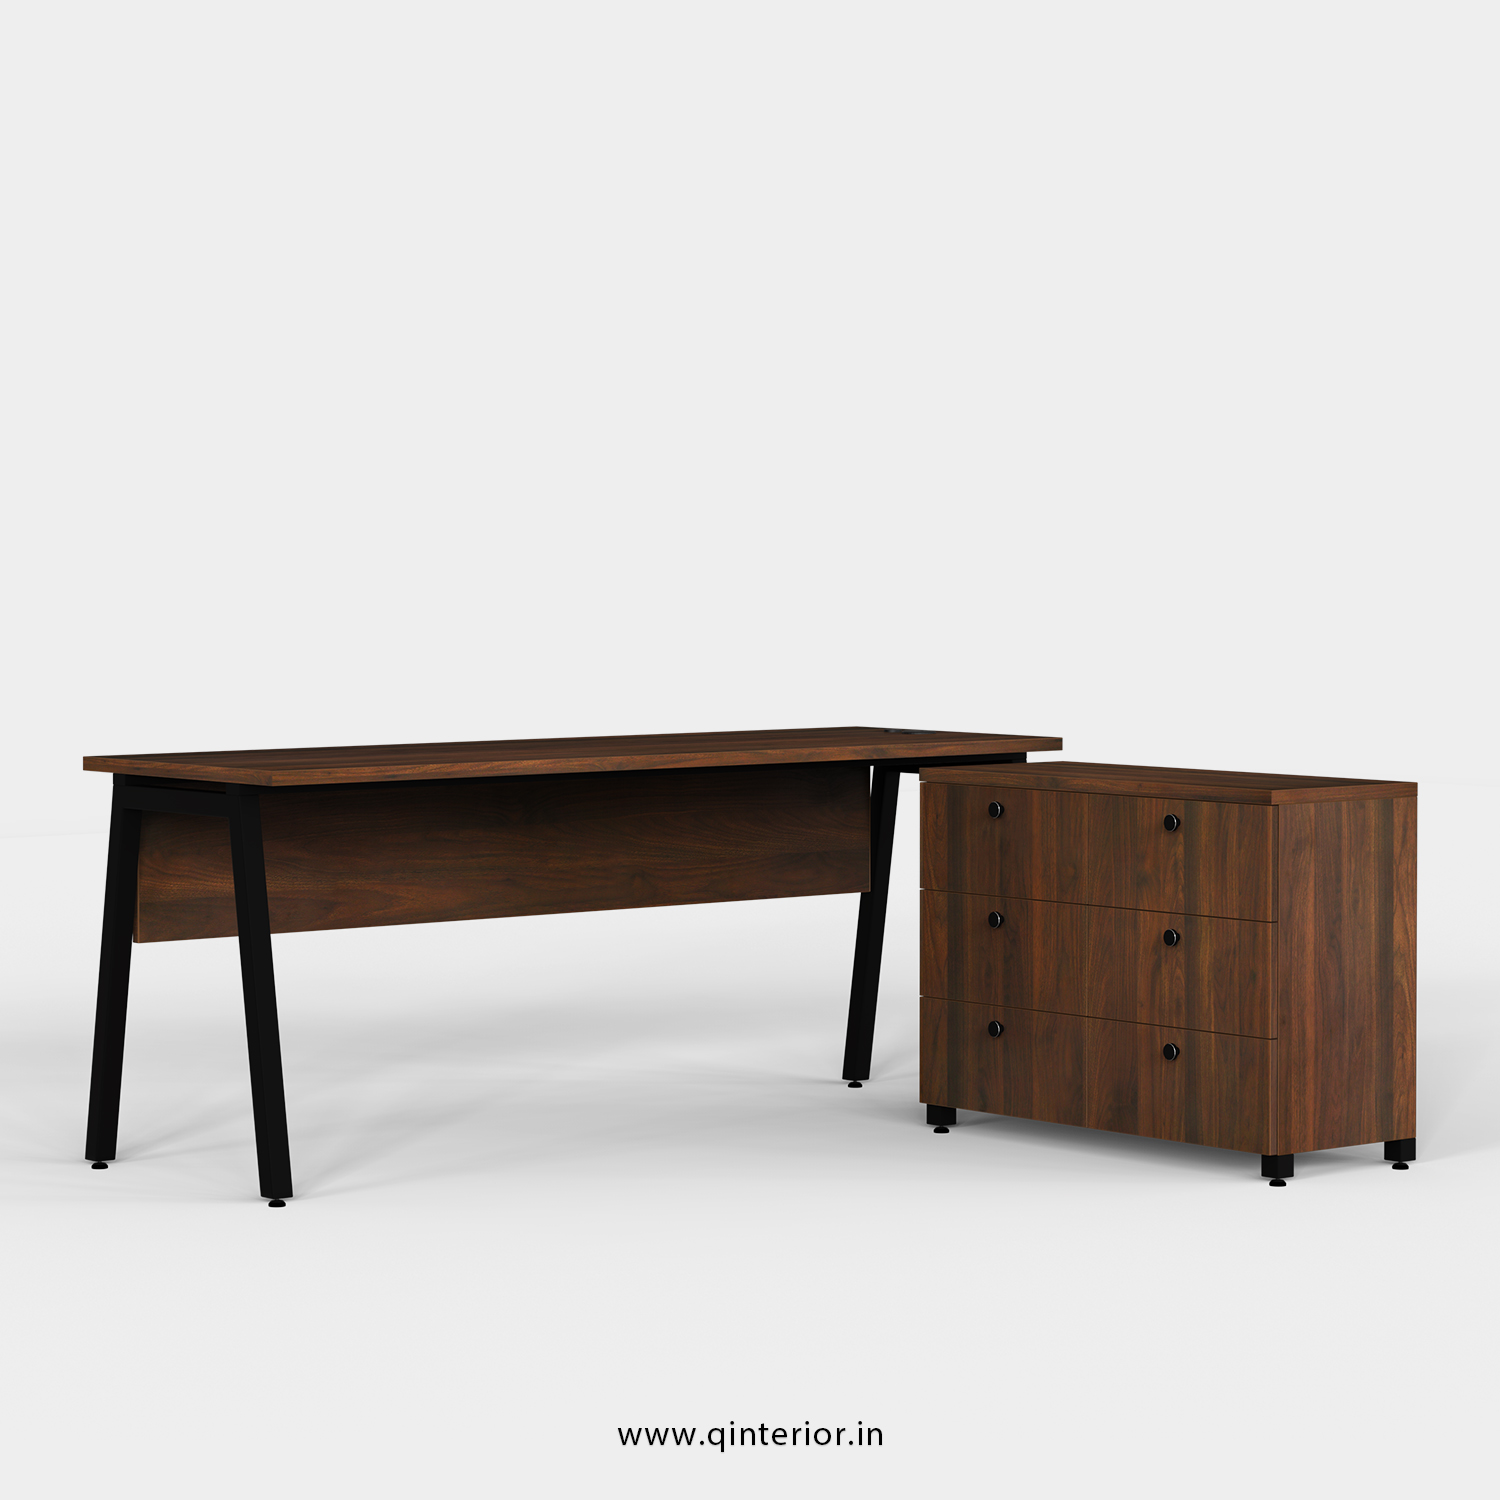 Berg Executive Table in Walnut Finish - OET104 C1